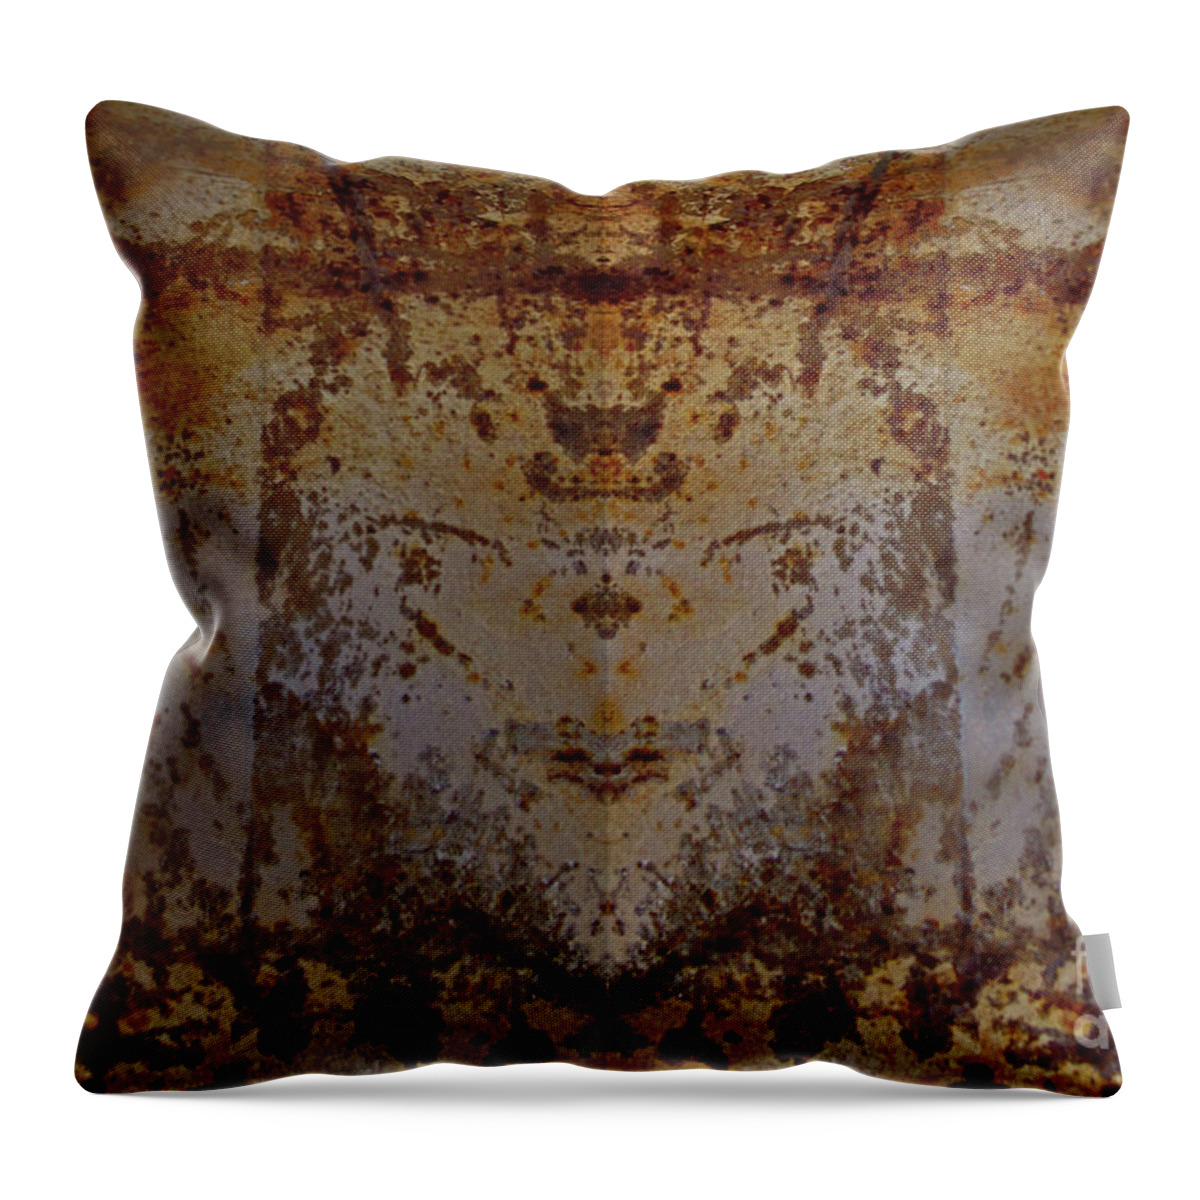 Abstract Throw Pillow featuring the photograph The Rusted Feline by Kelly Holm